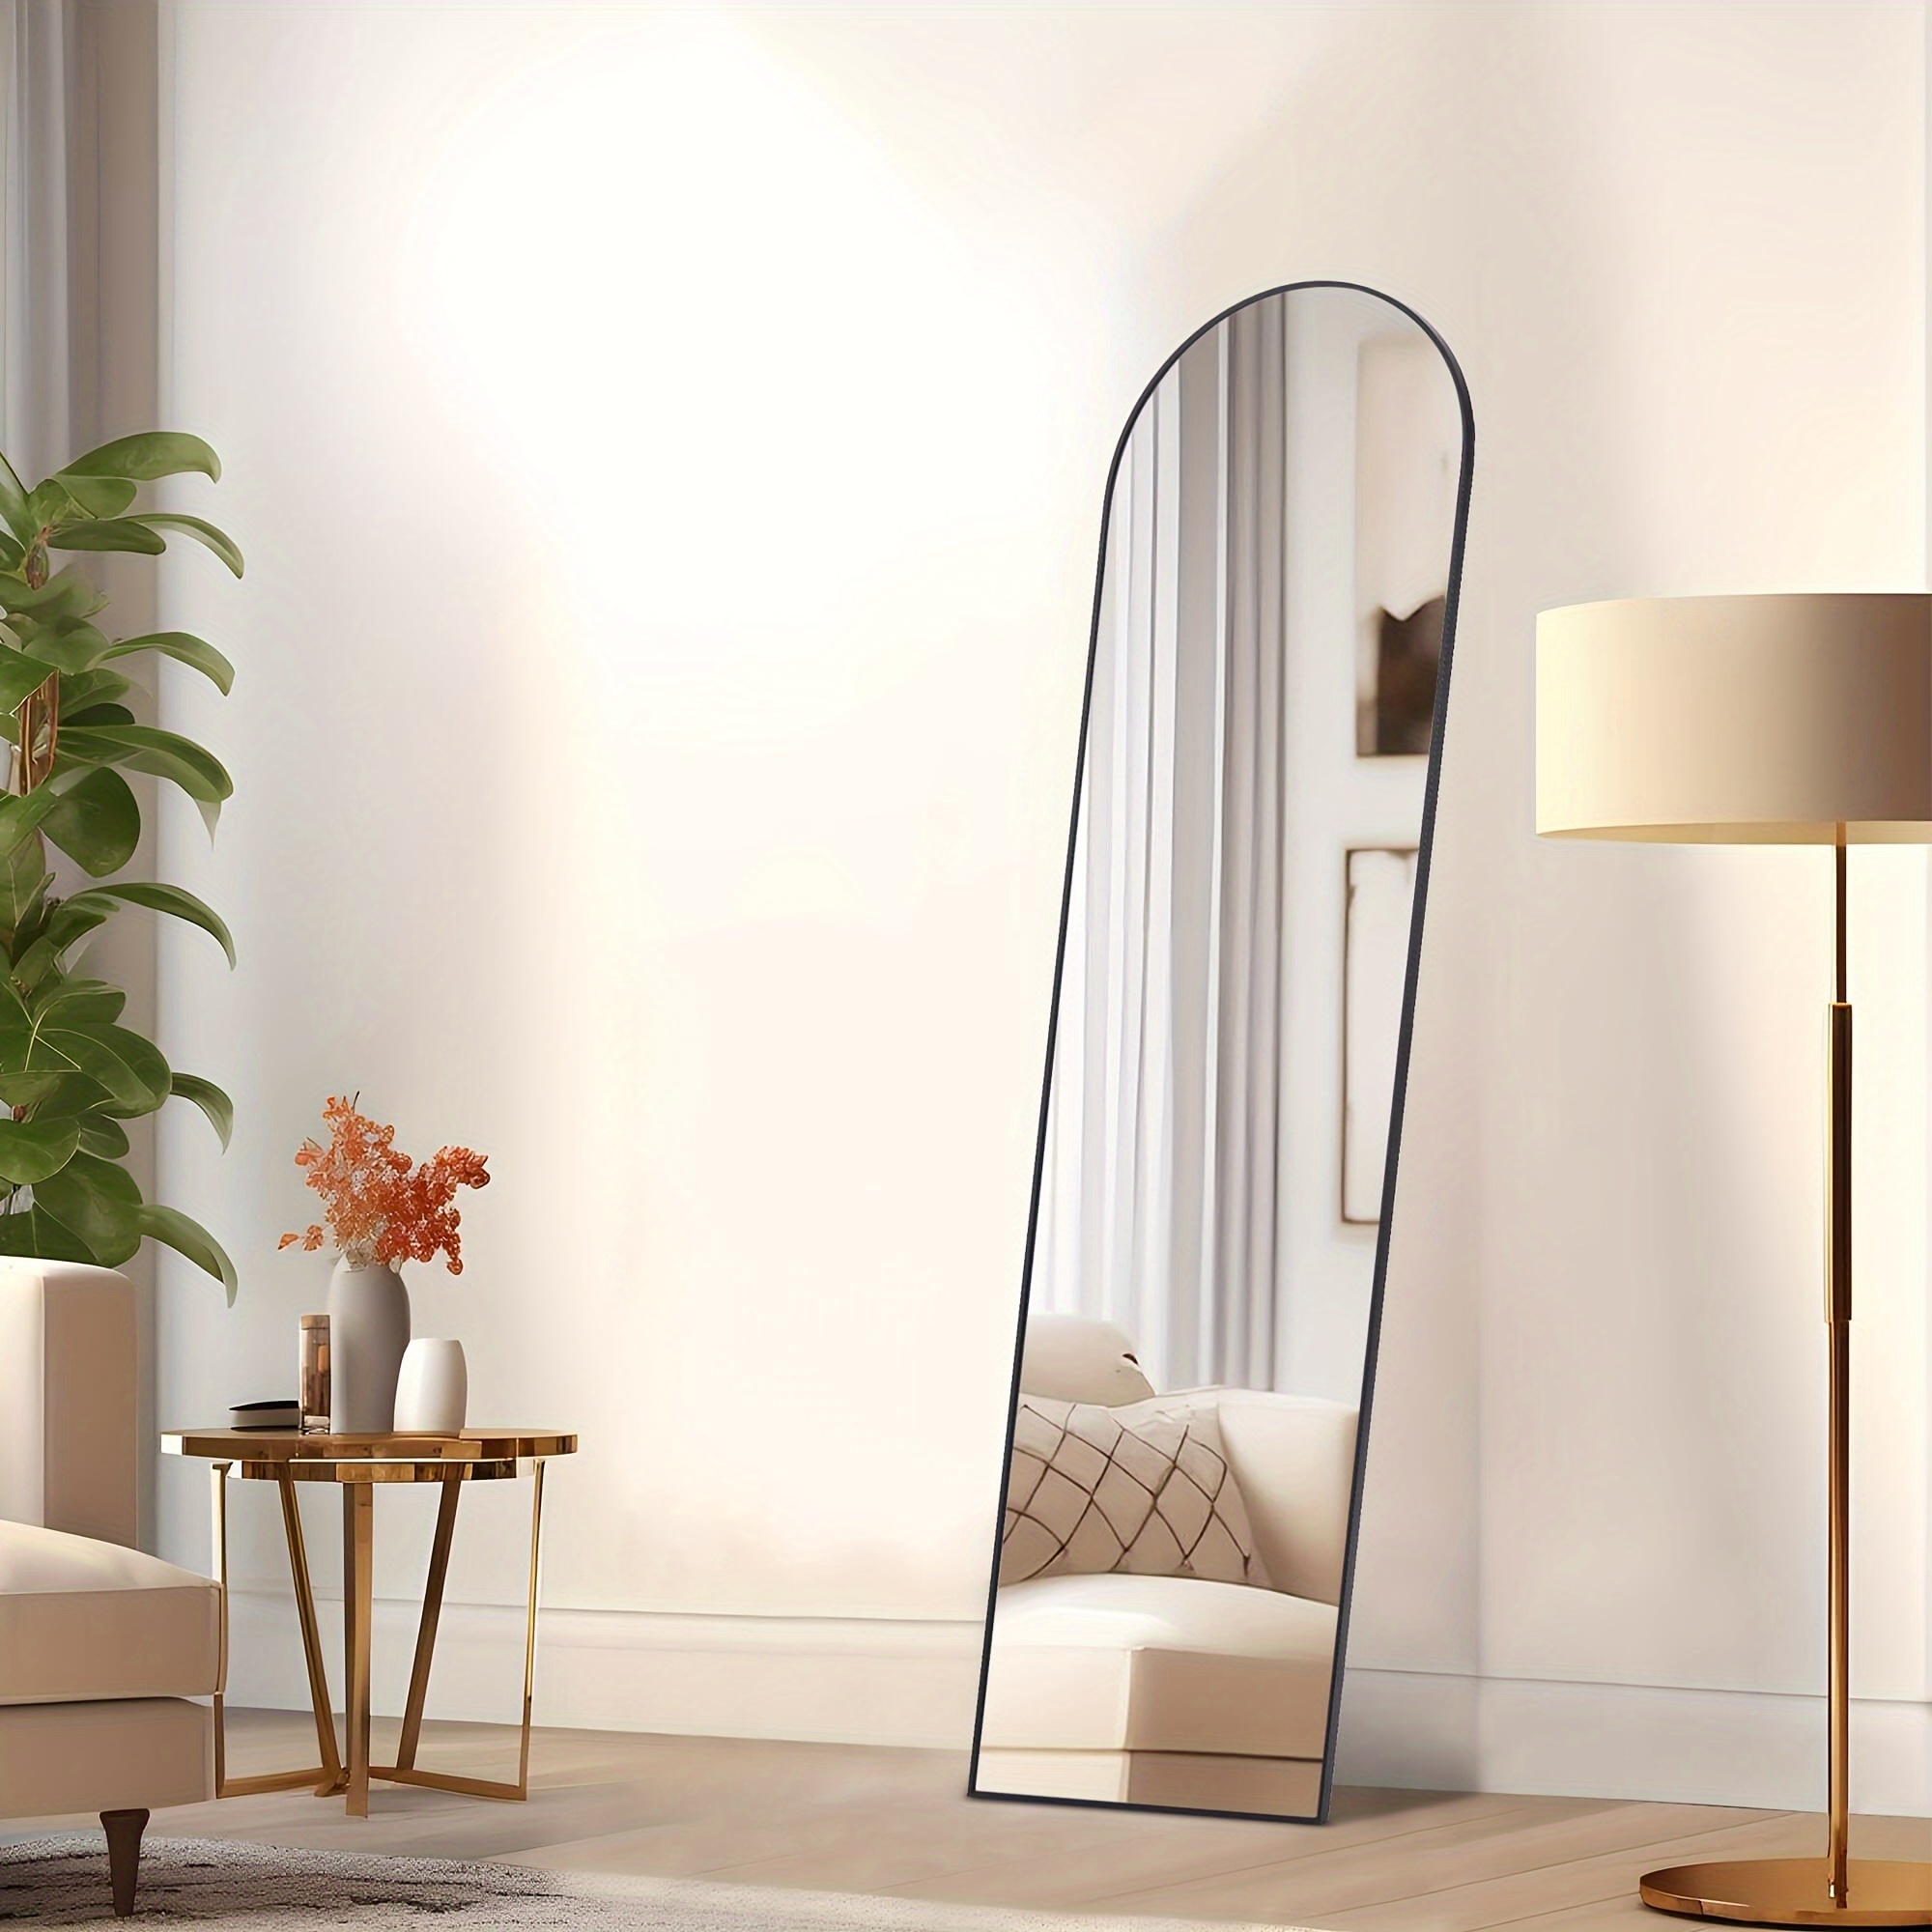 

1pc Full Length Mirror Body Mirror Floor Standing Mirror Hanging Or Leaning Against Wall, Wall Mirror With Stand Aluminum Alloy Thin Frame For Living Room Bedroom Cloakroom Decor